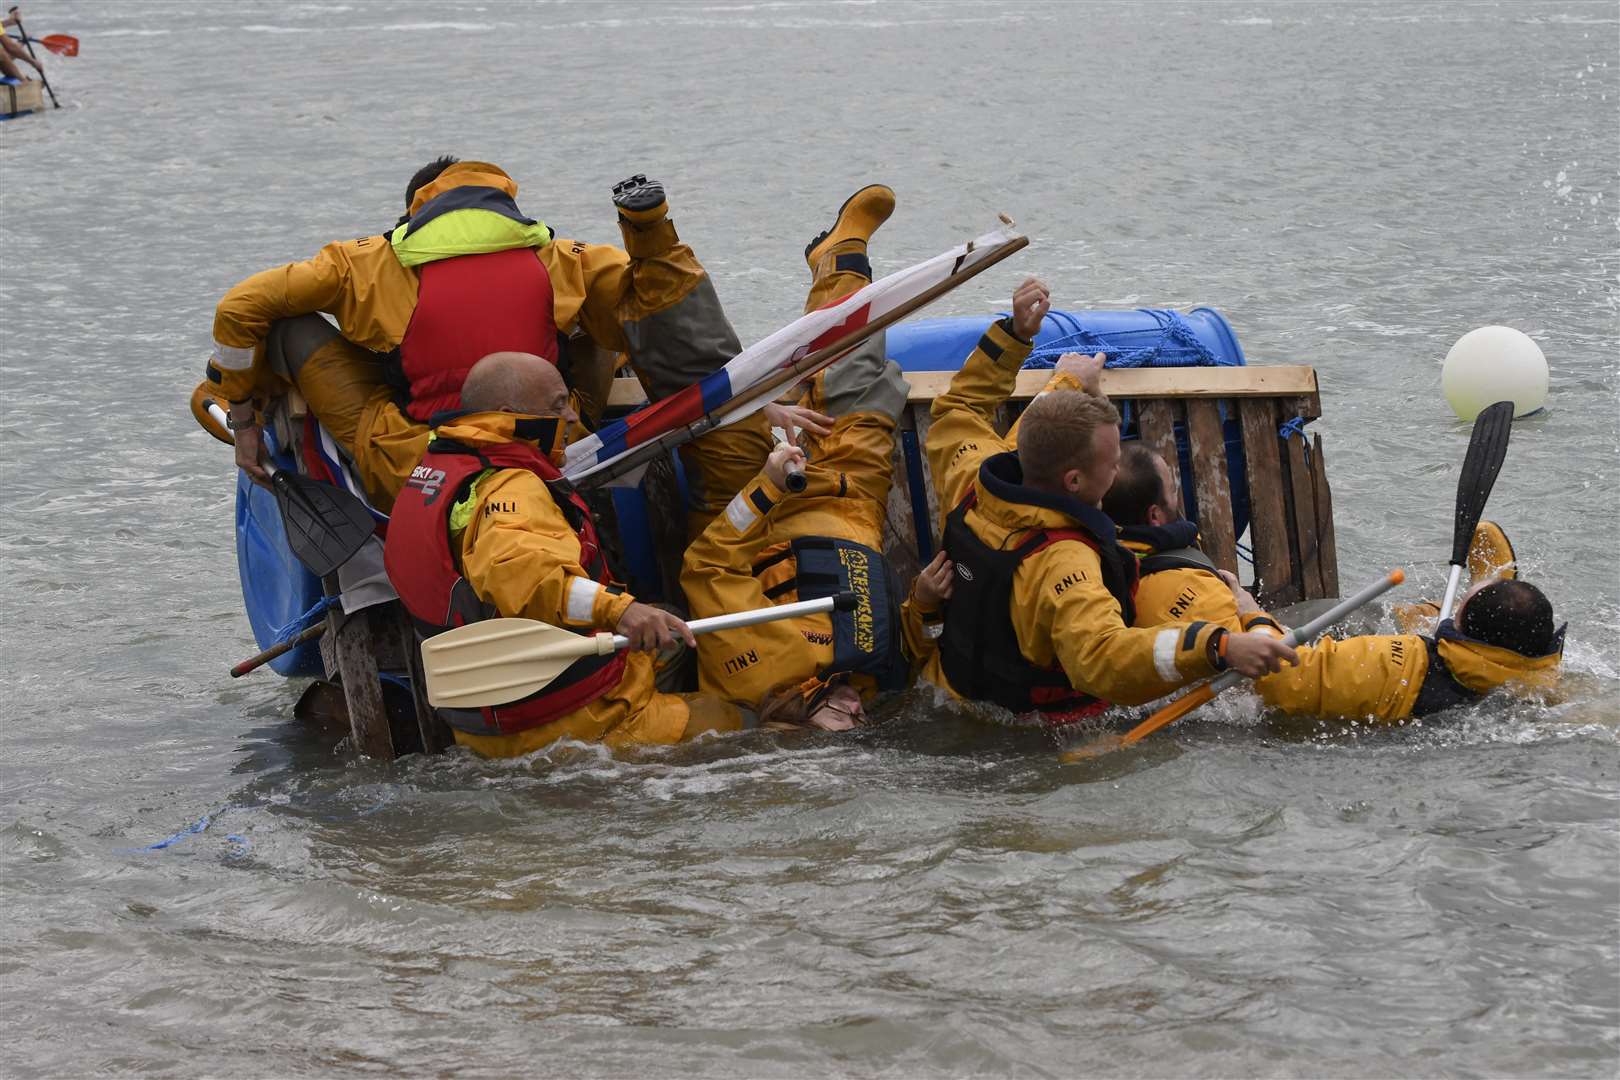 A raft capsizing during the Port of Dover Community Regatta earlier this year